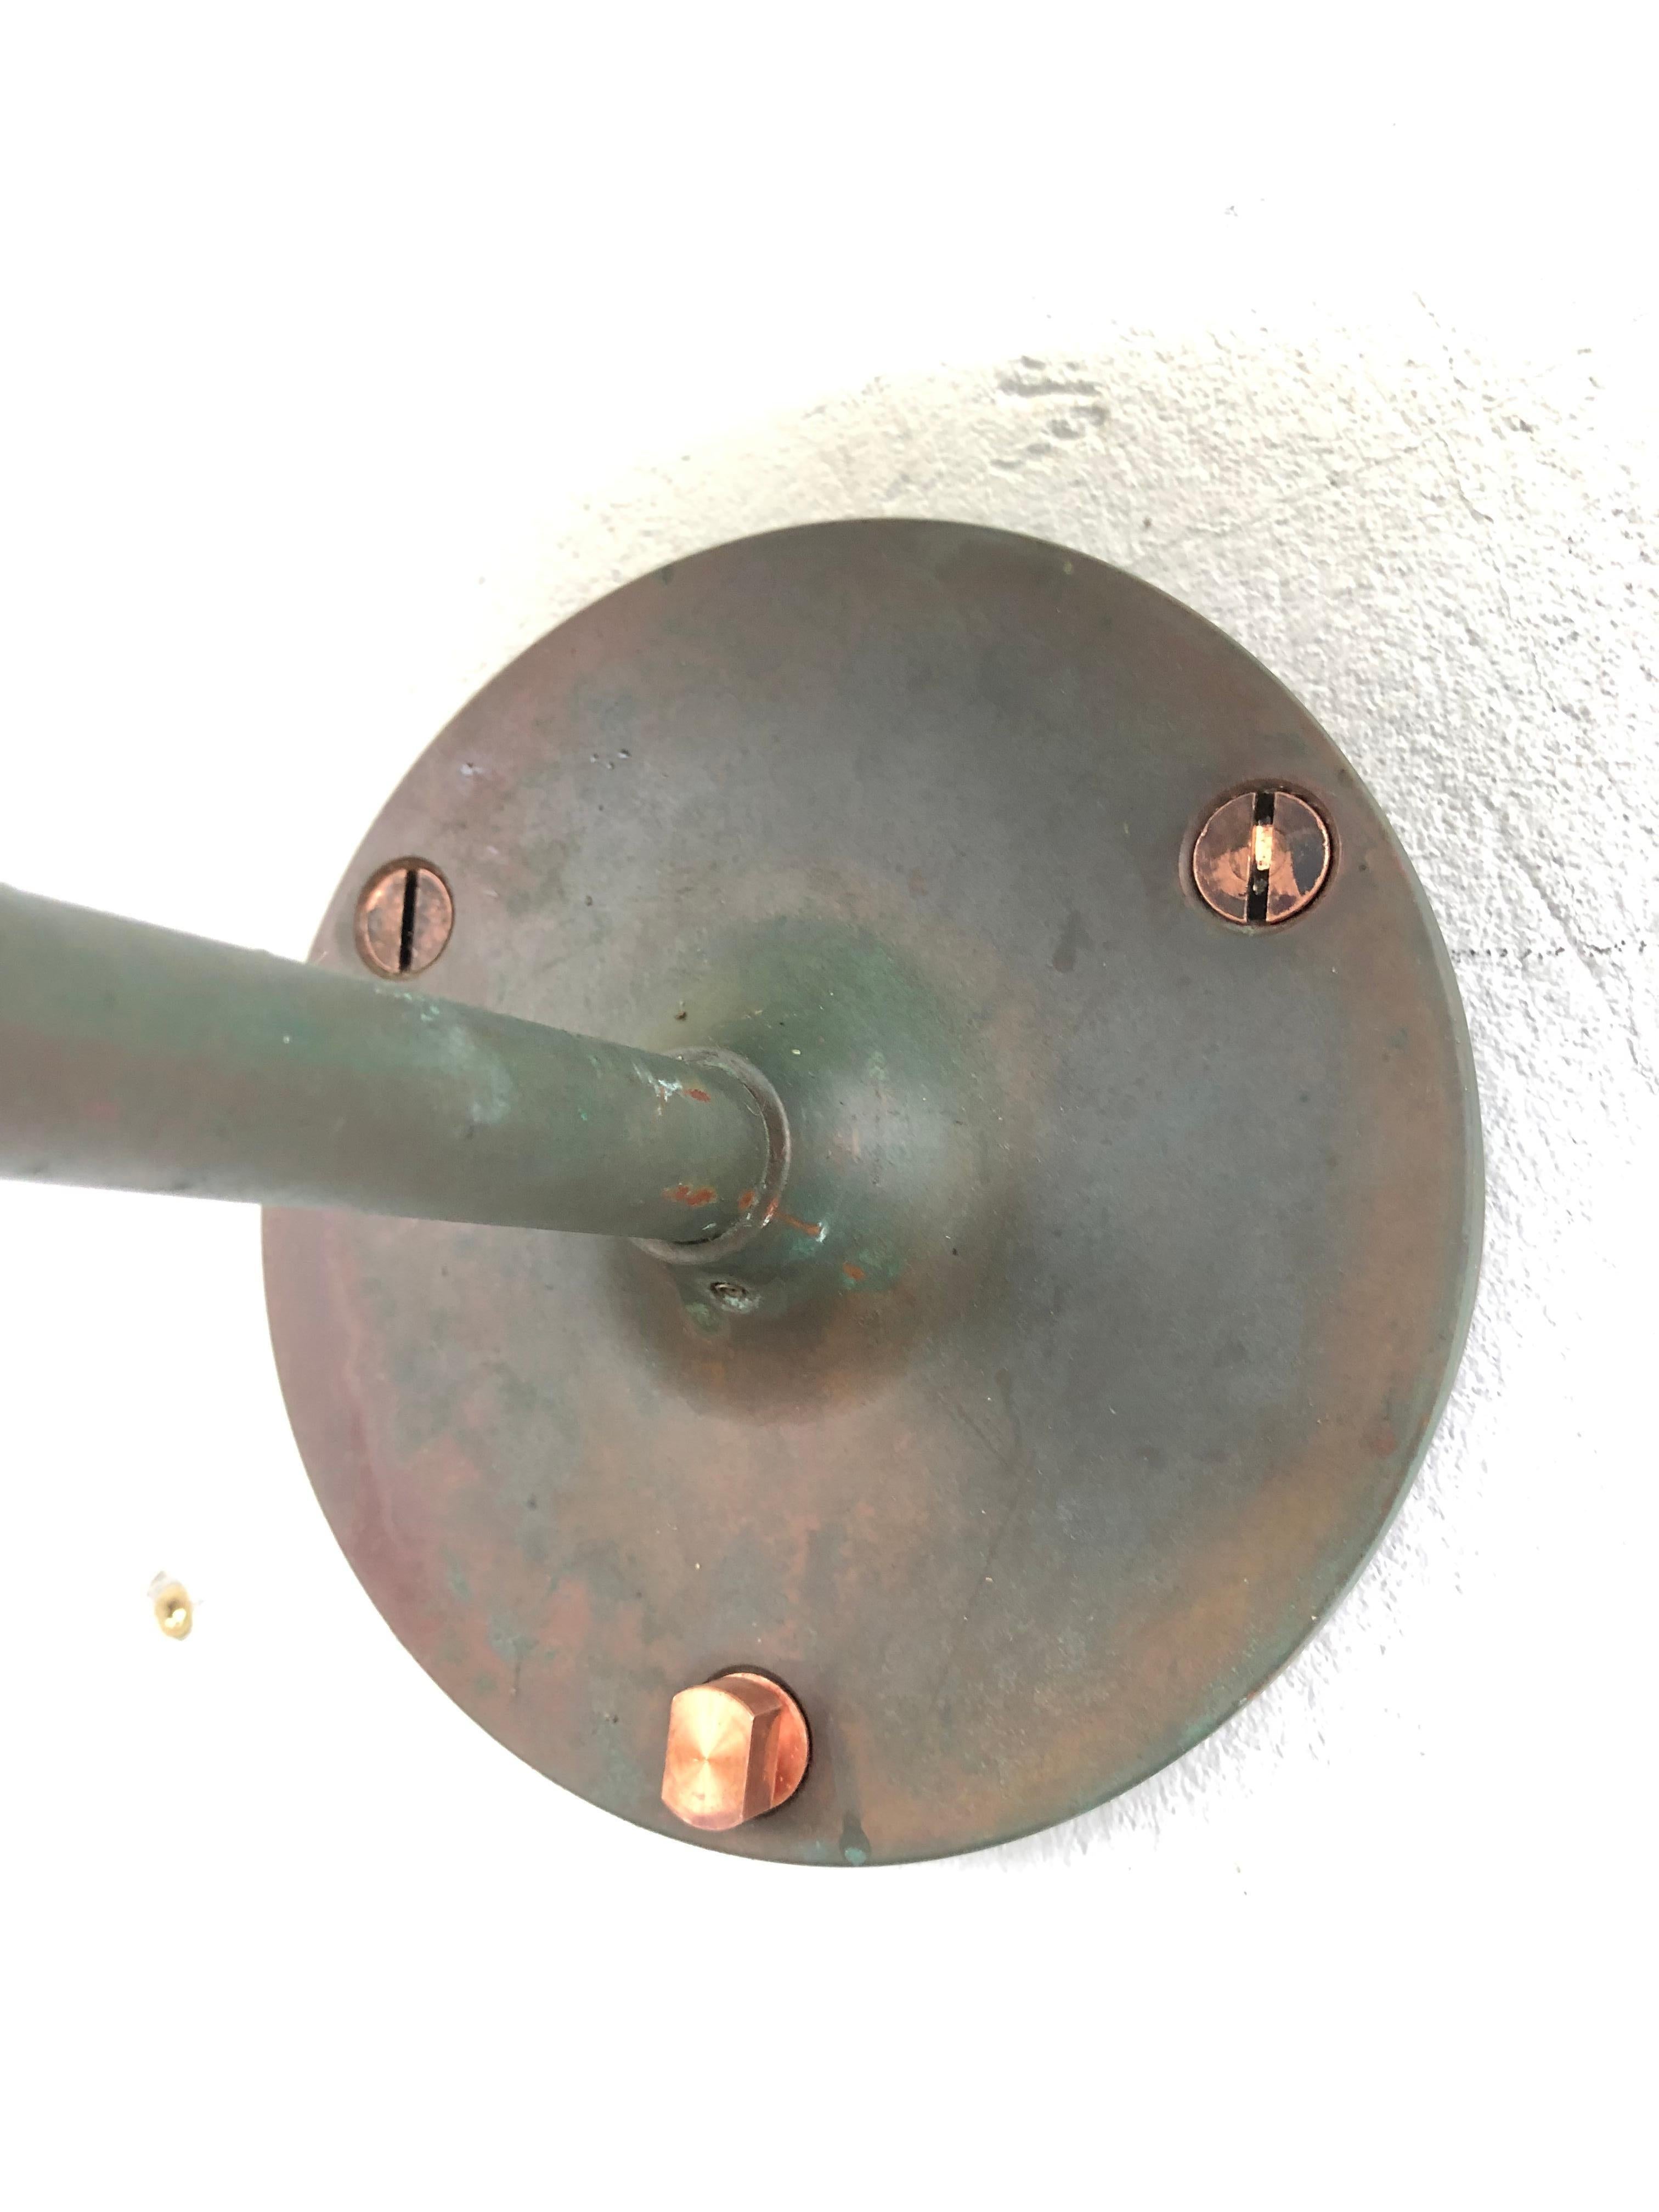 Pair of Iconic Poul Henningsen Copper Wall Lamps by Louis Poulsen of DK 3